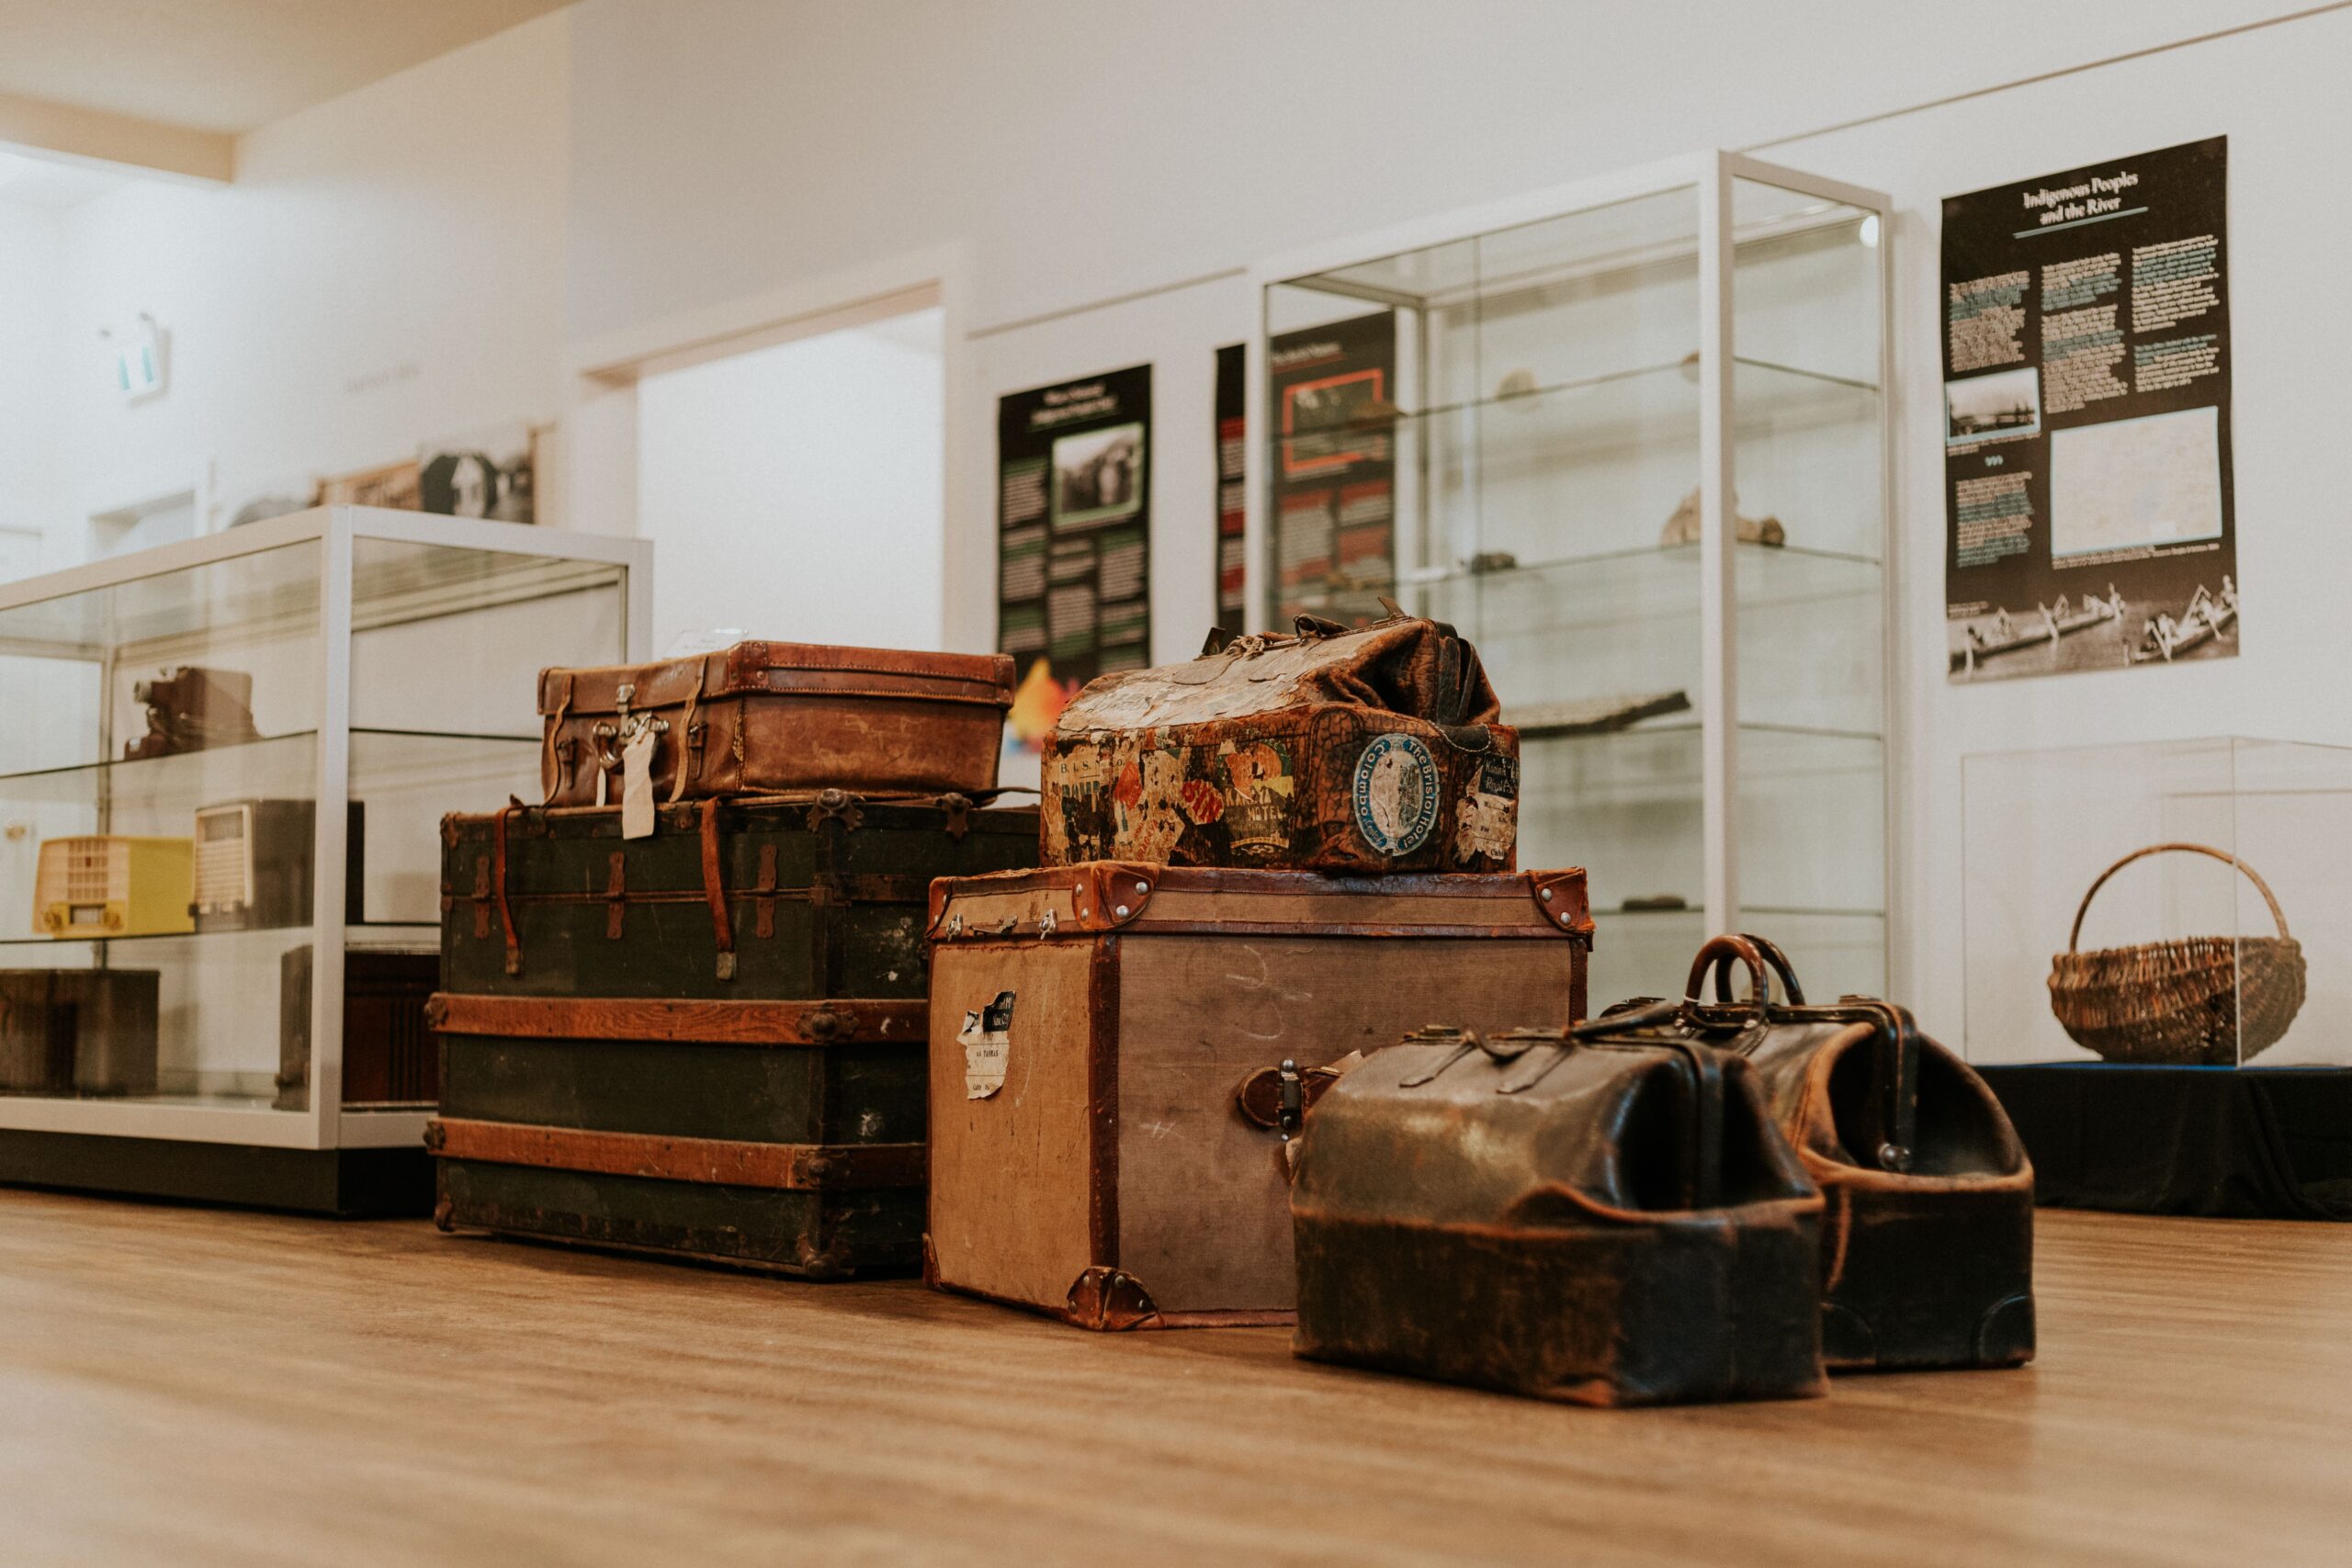 A room filled with vintage suitcases and bags from the past, creating a nostalgic atmosphere.